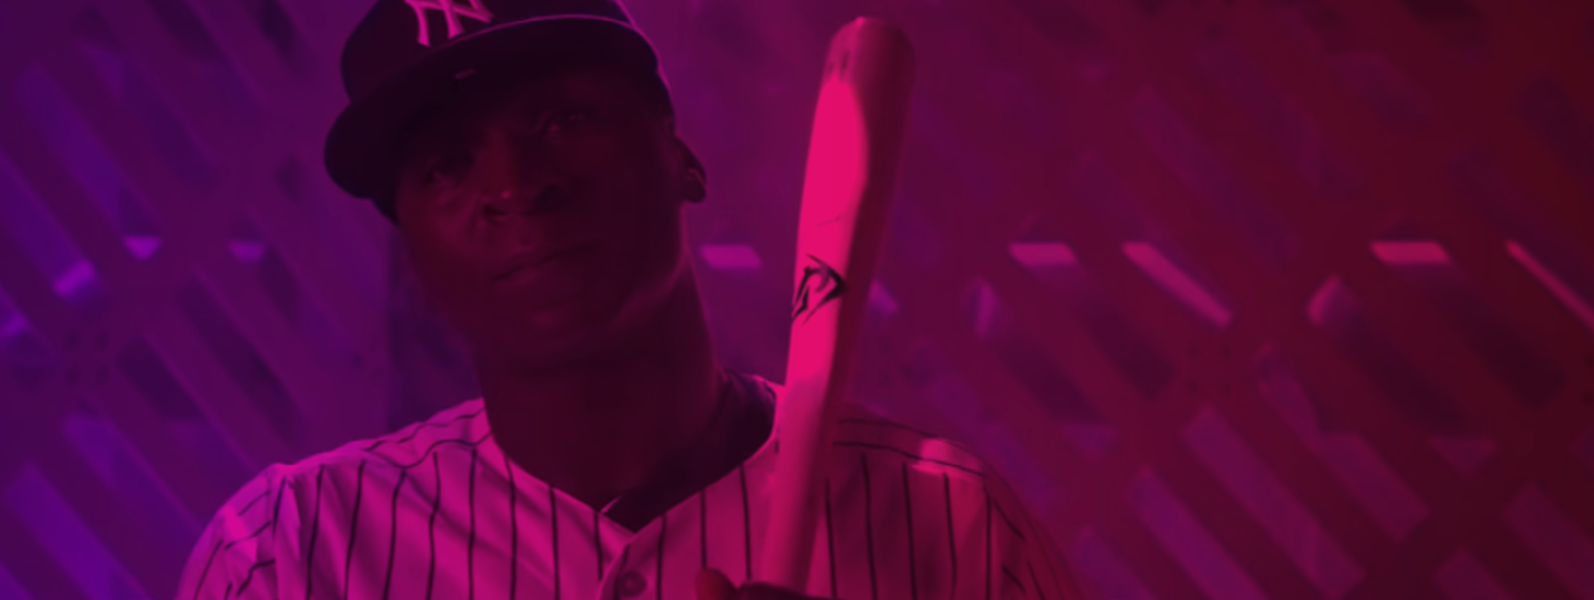 In Focus: Yankees Productions on Sports Video &amp; Fan Engagement